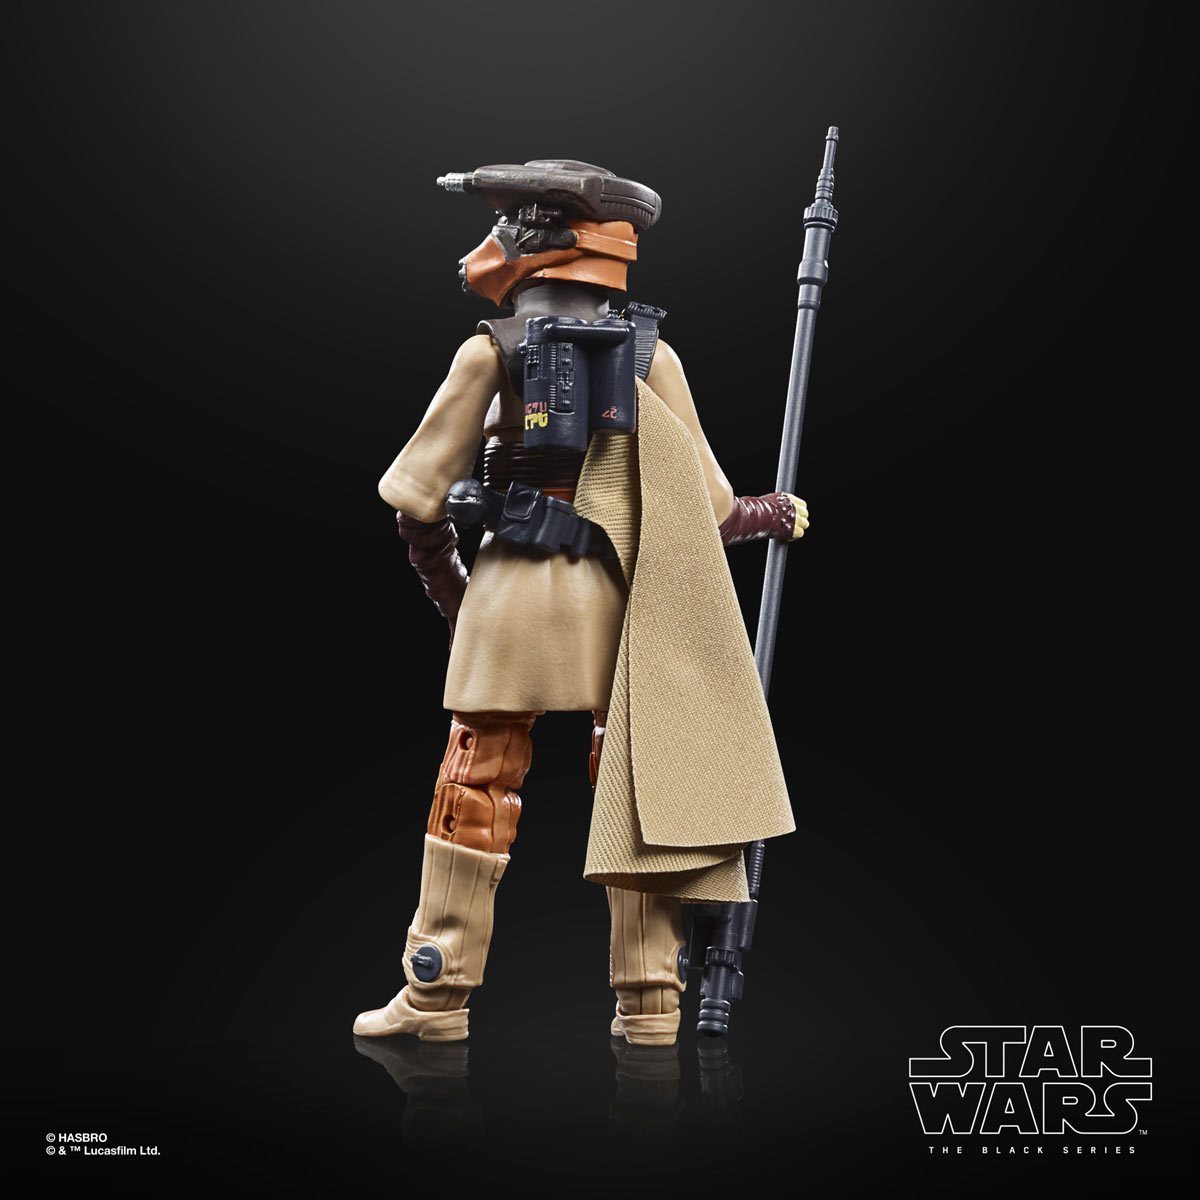 Star Wars The Black Series Episode 8 General Leia Organa Action Figure 6-inch for sale online 